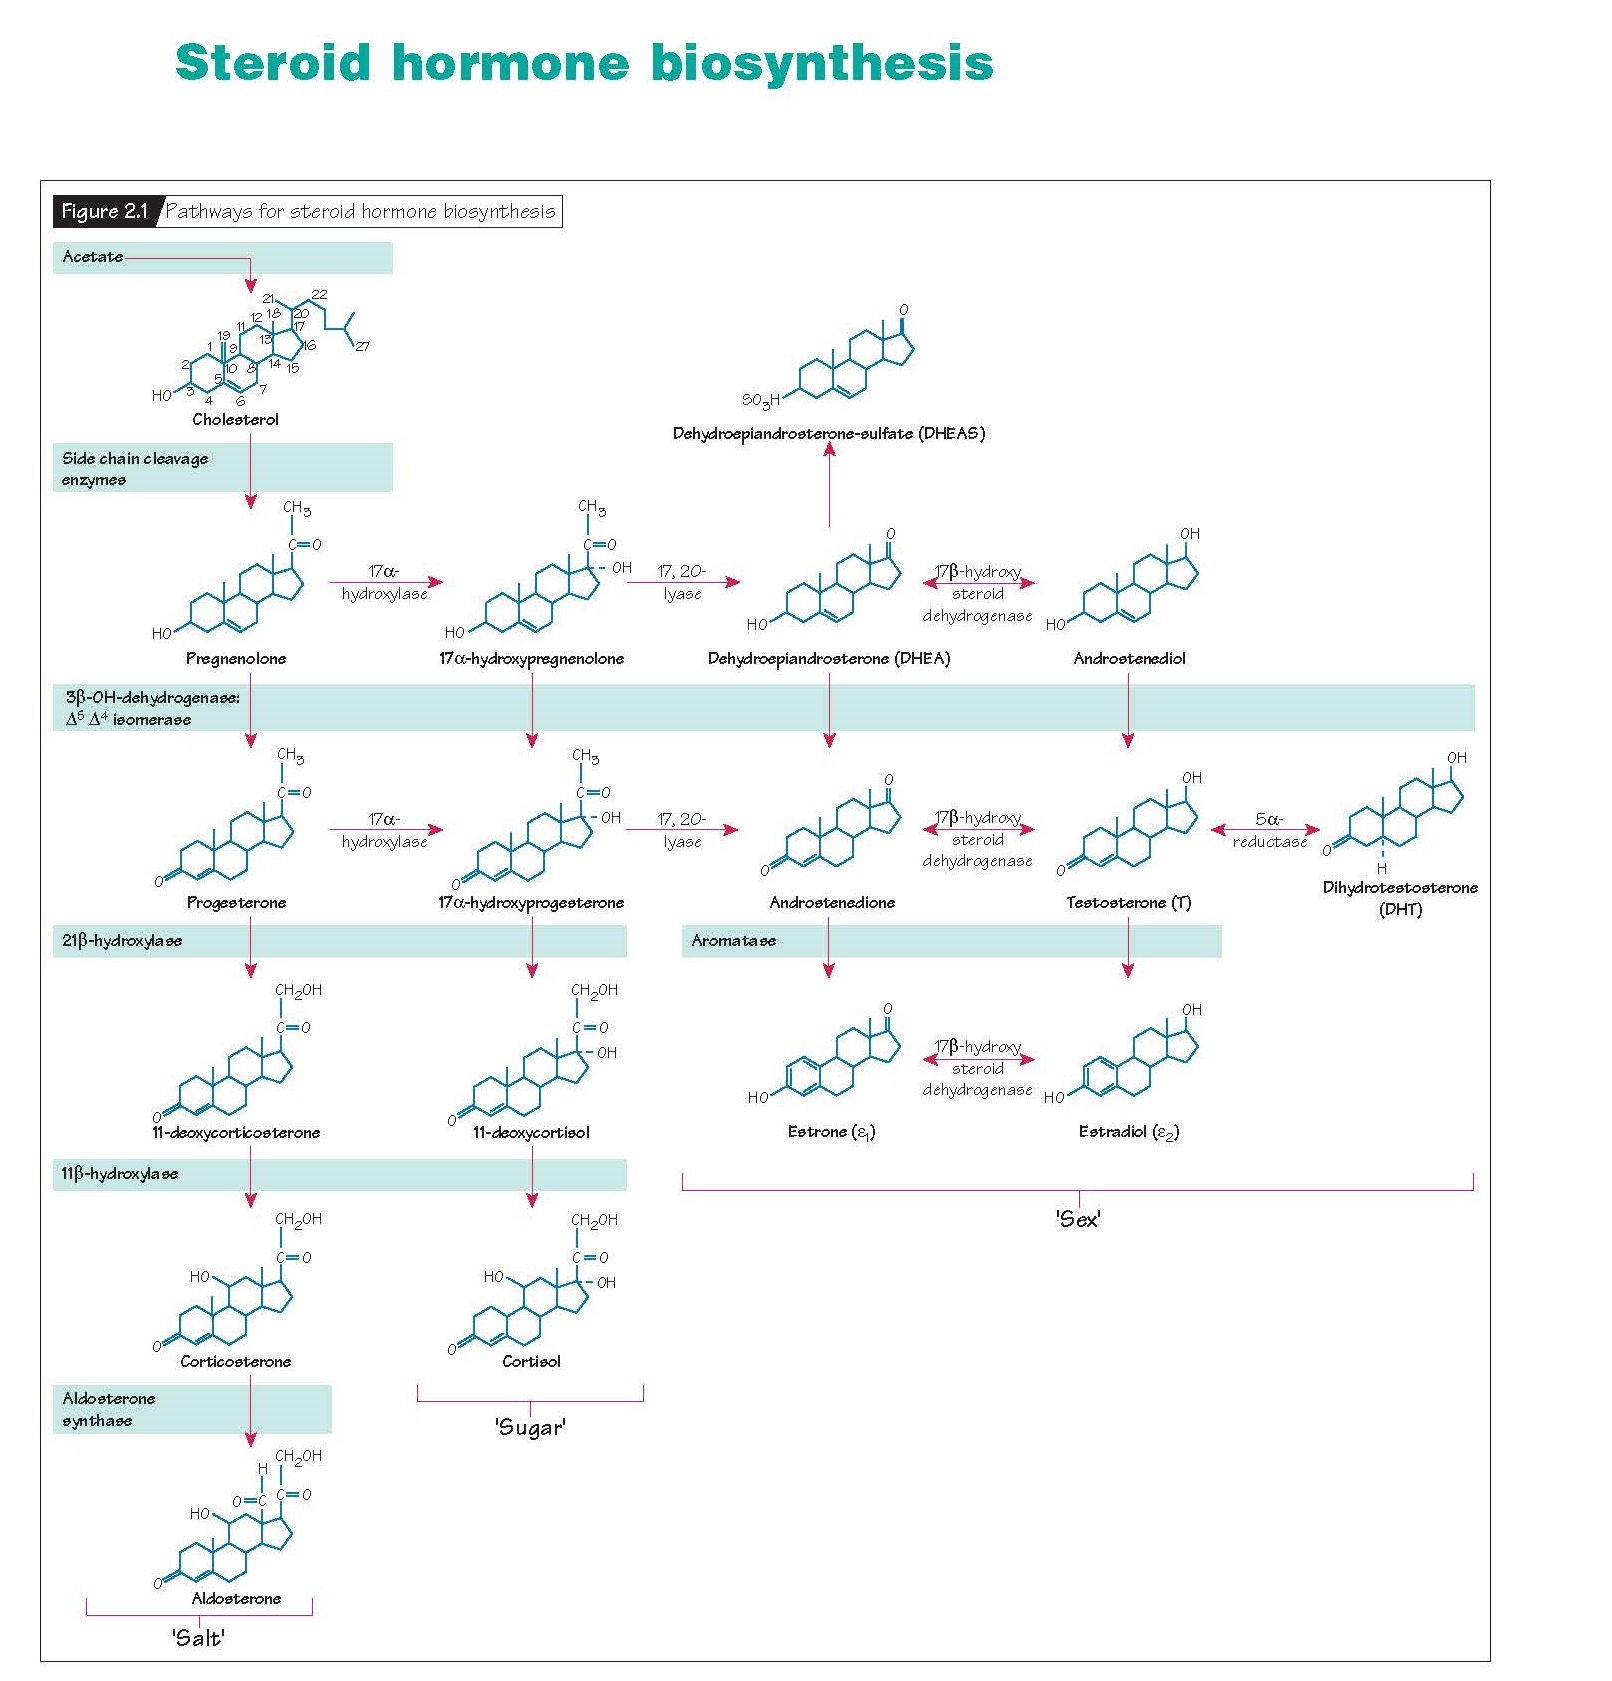 Steroid Hormone Biosynthesis, low density lipoproteins, Ovary, Testes, Adrenals,